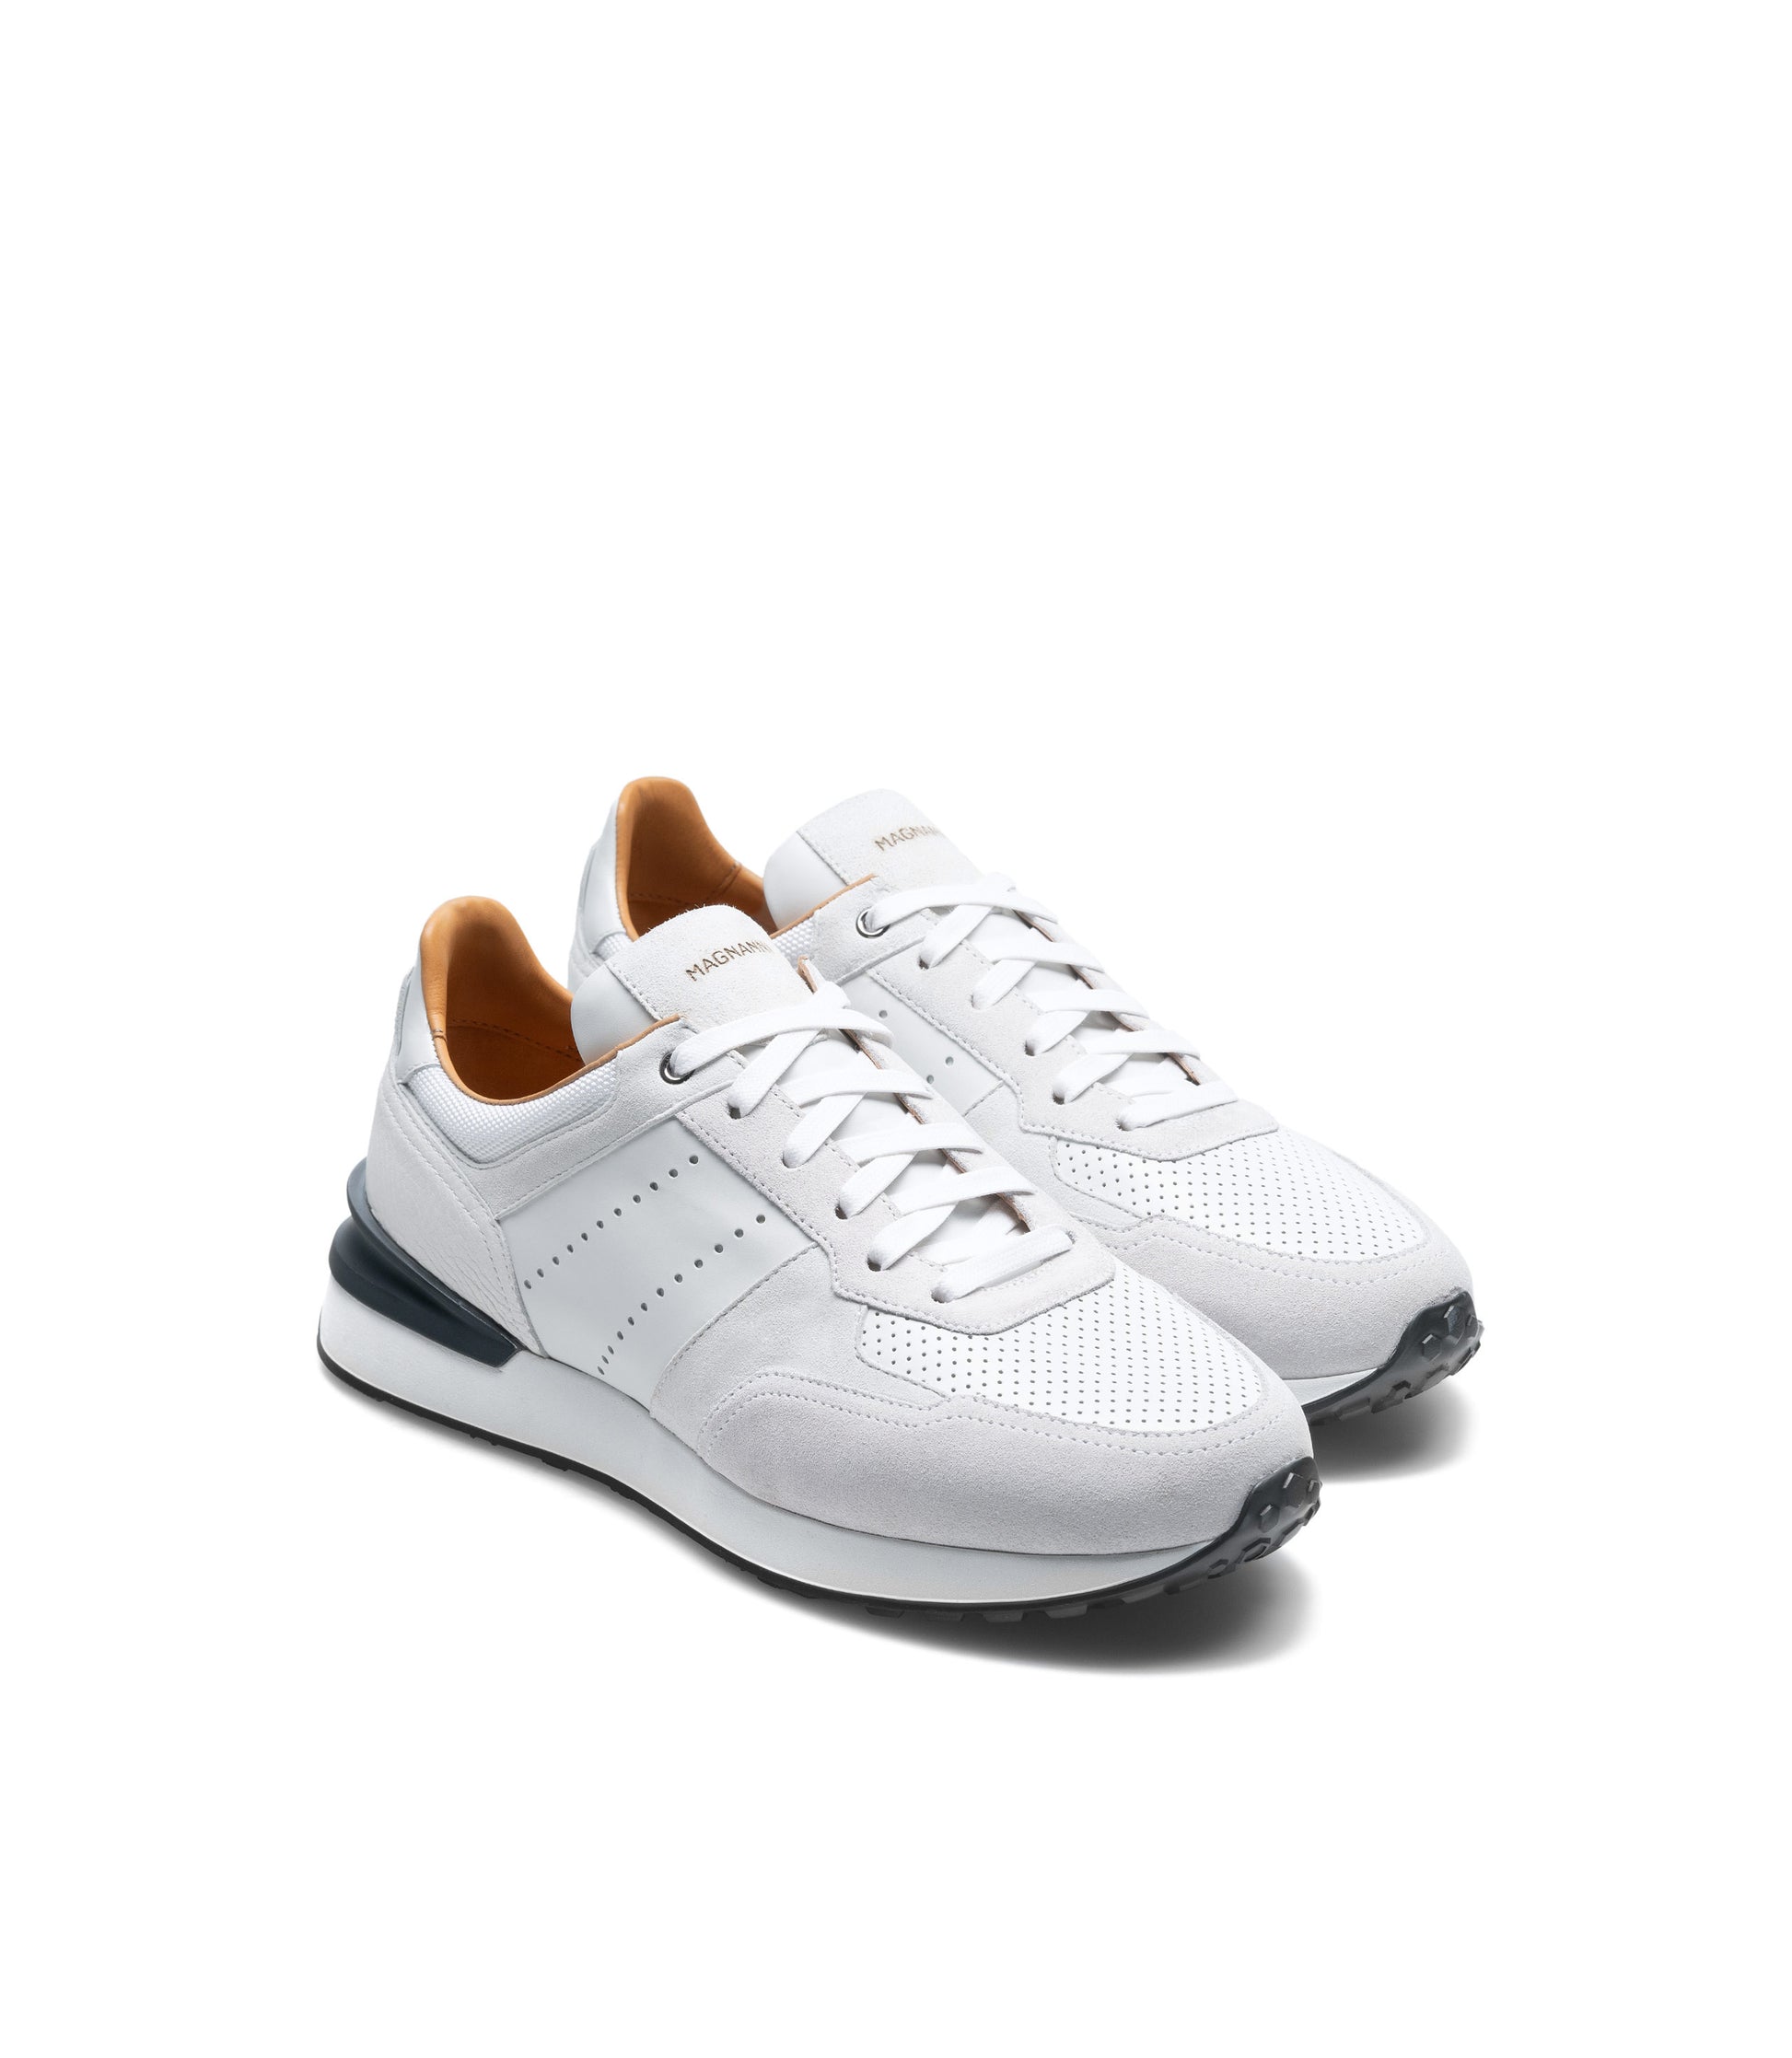 Pair of men's white leather Magnanni Sona sneakers on a white background.